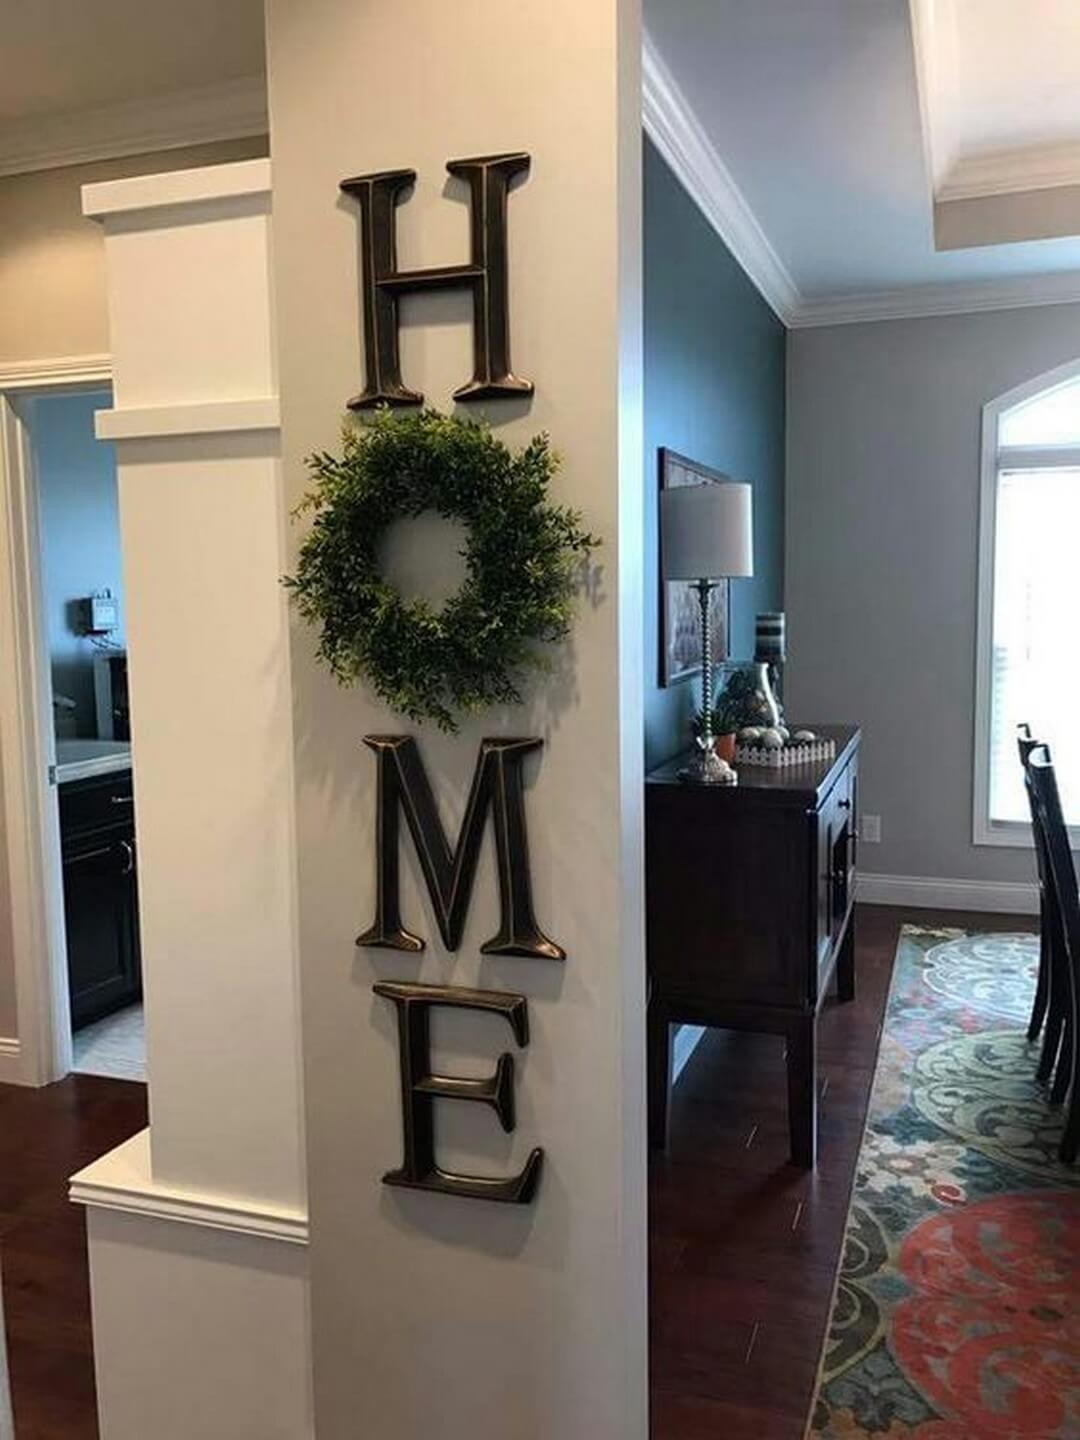 Home Is Where the Wreath Is